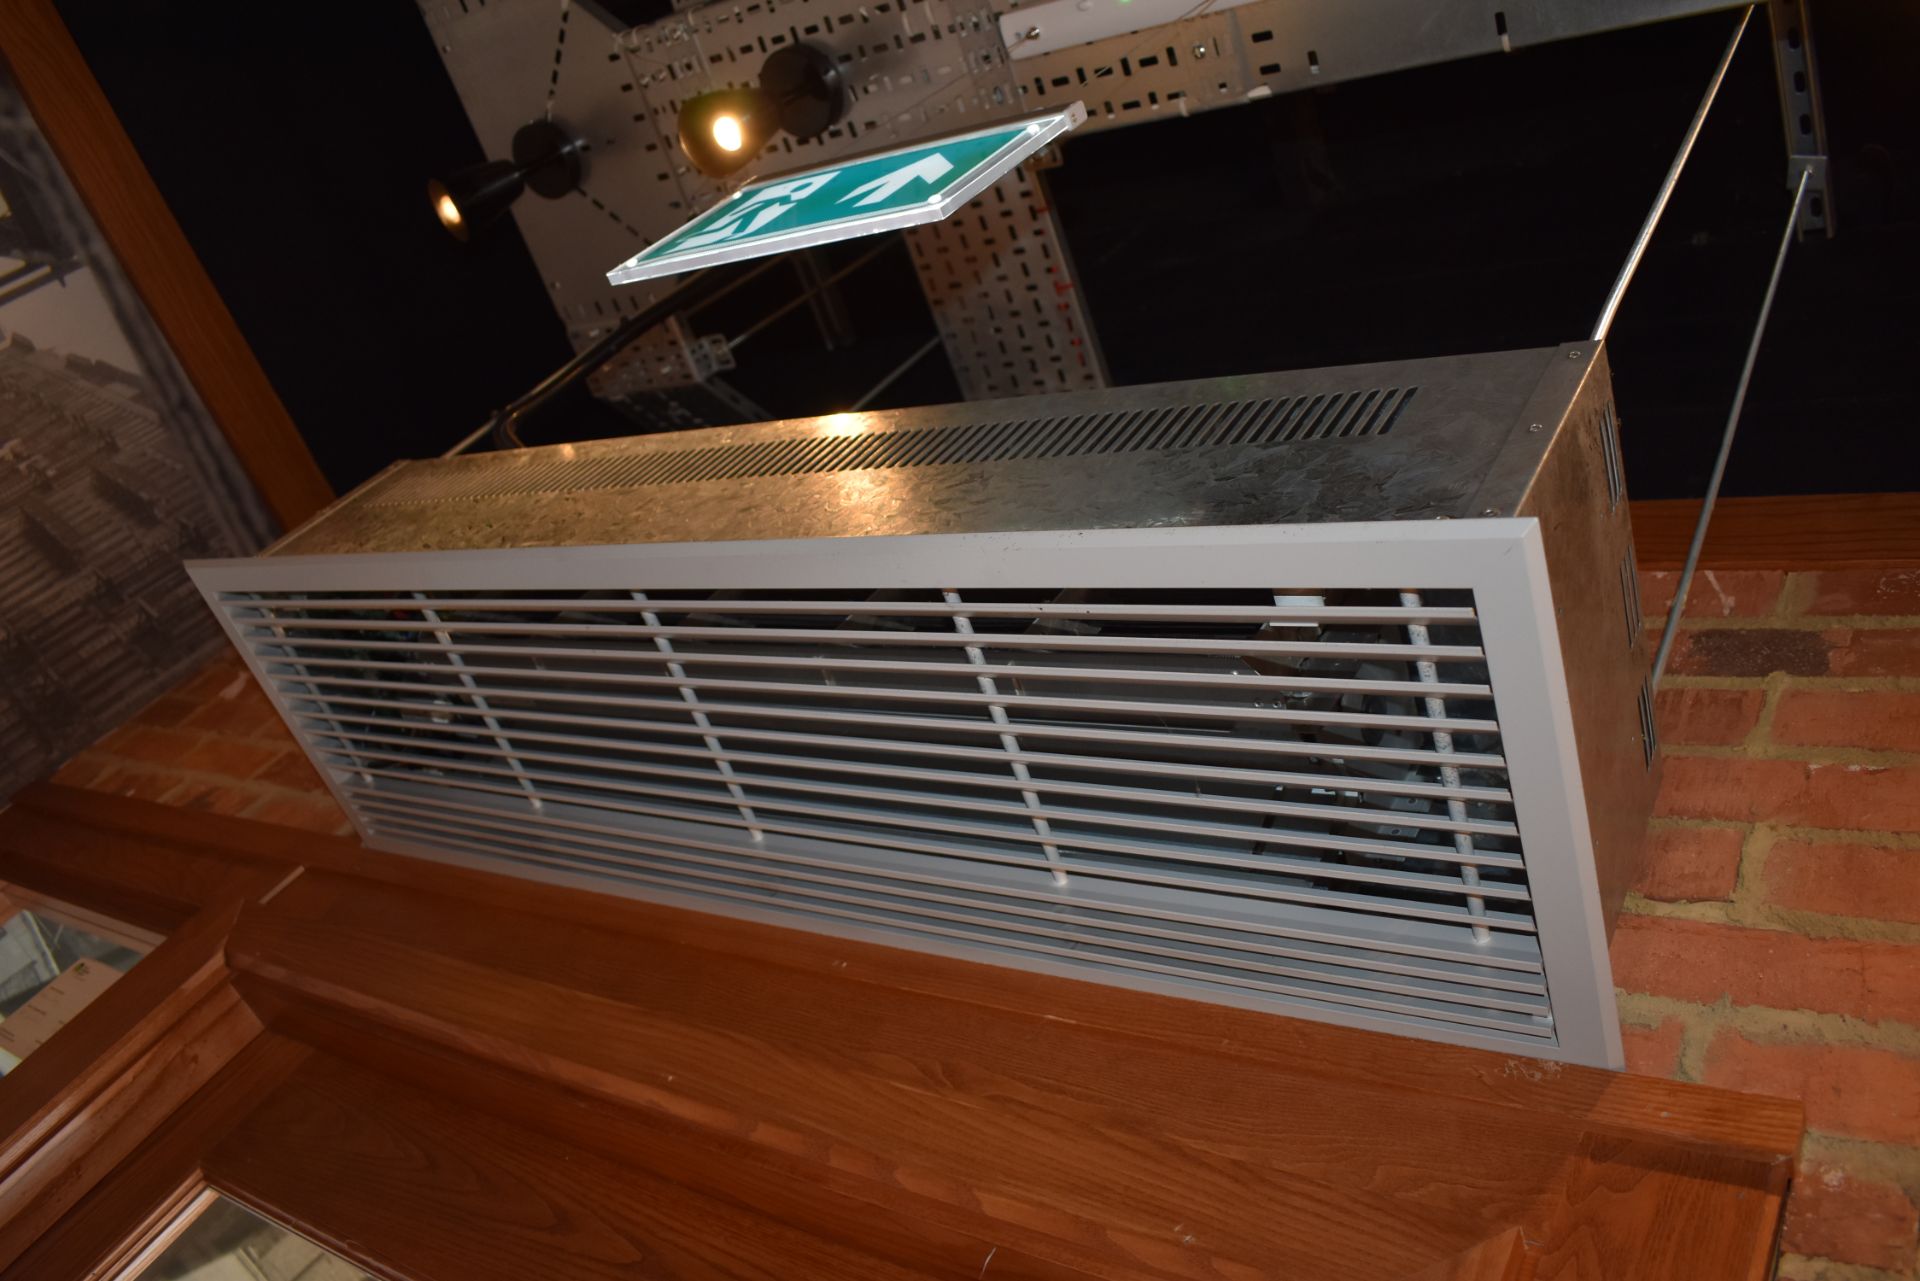 1 x Suspended 1 Meter Deck Fan / Heater - Ideal For Over Entrance Doors - CL499 - Location: London - Image 2 of 3